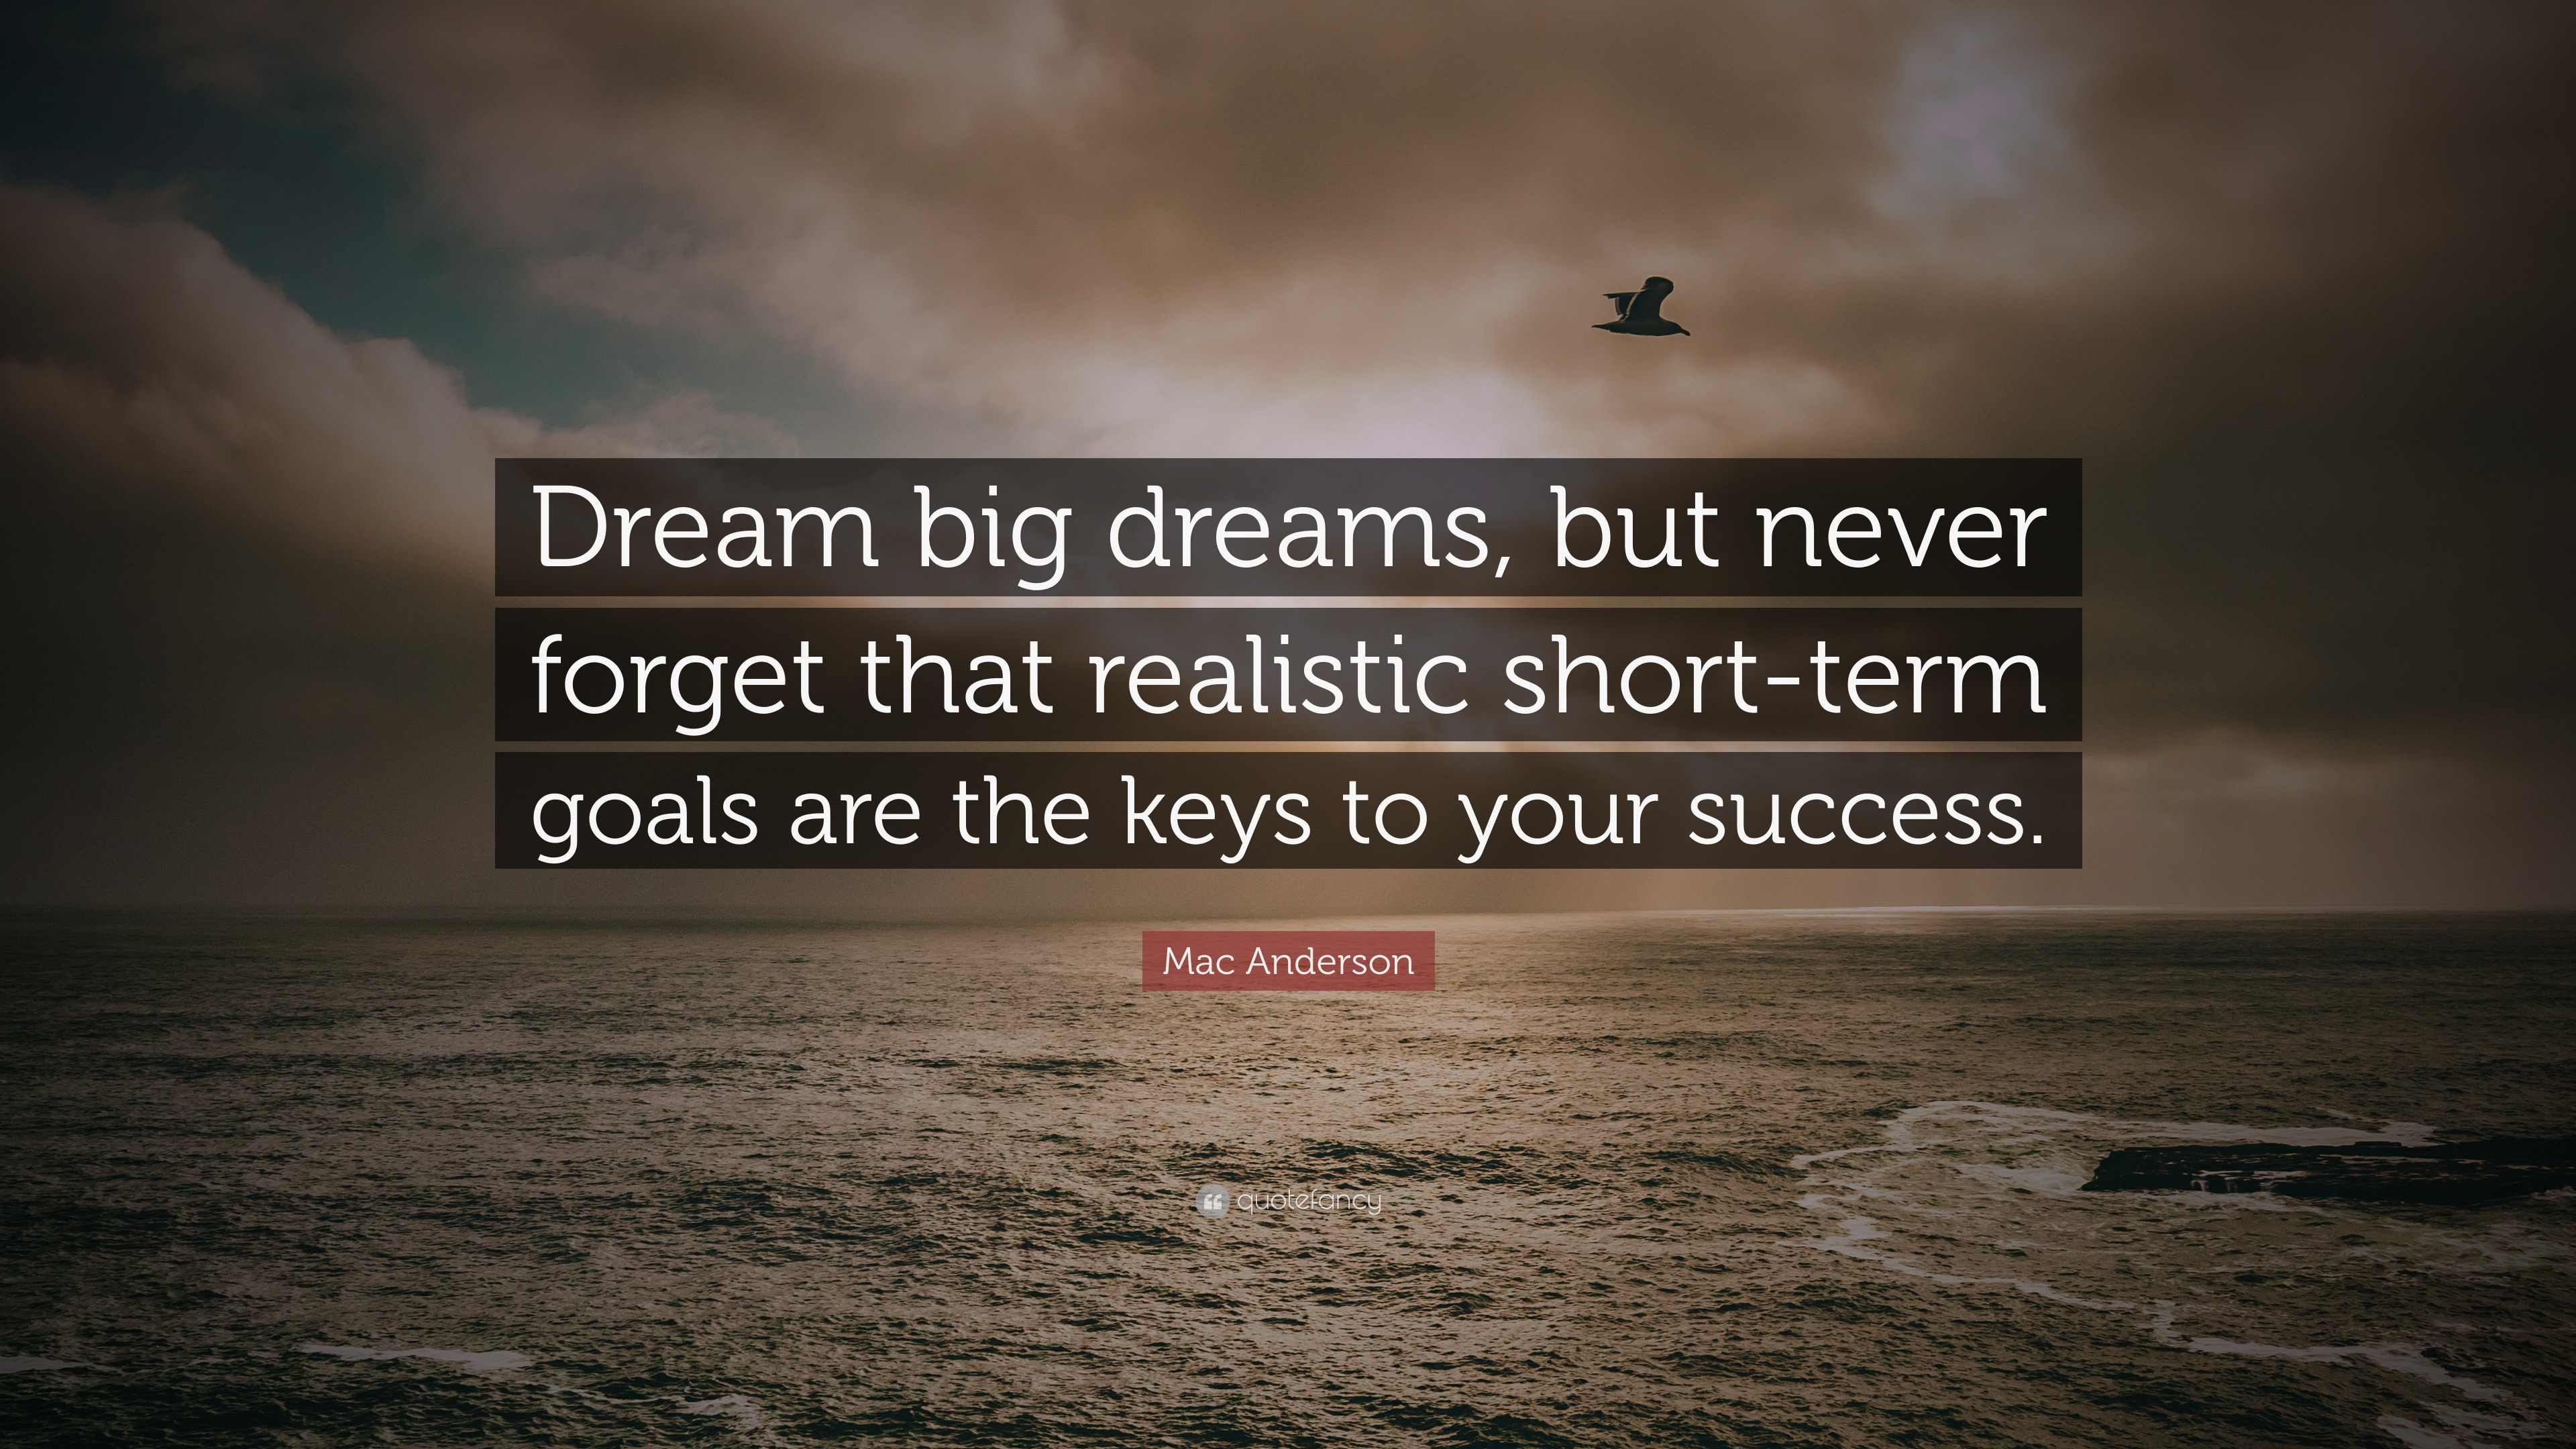 Mac Anderson Quote: “Dream big dreams, but never forget that realistic ...
